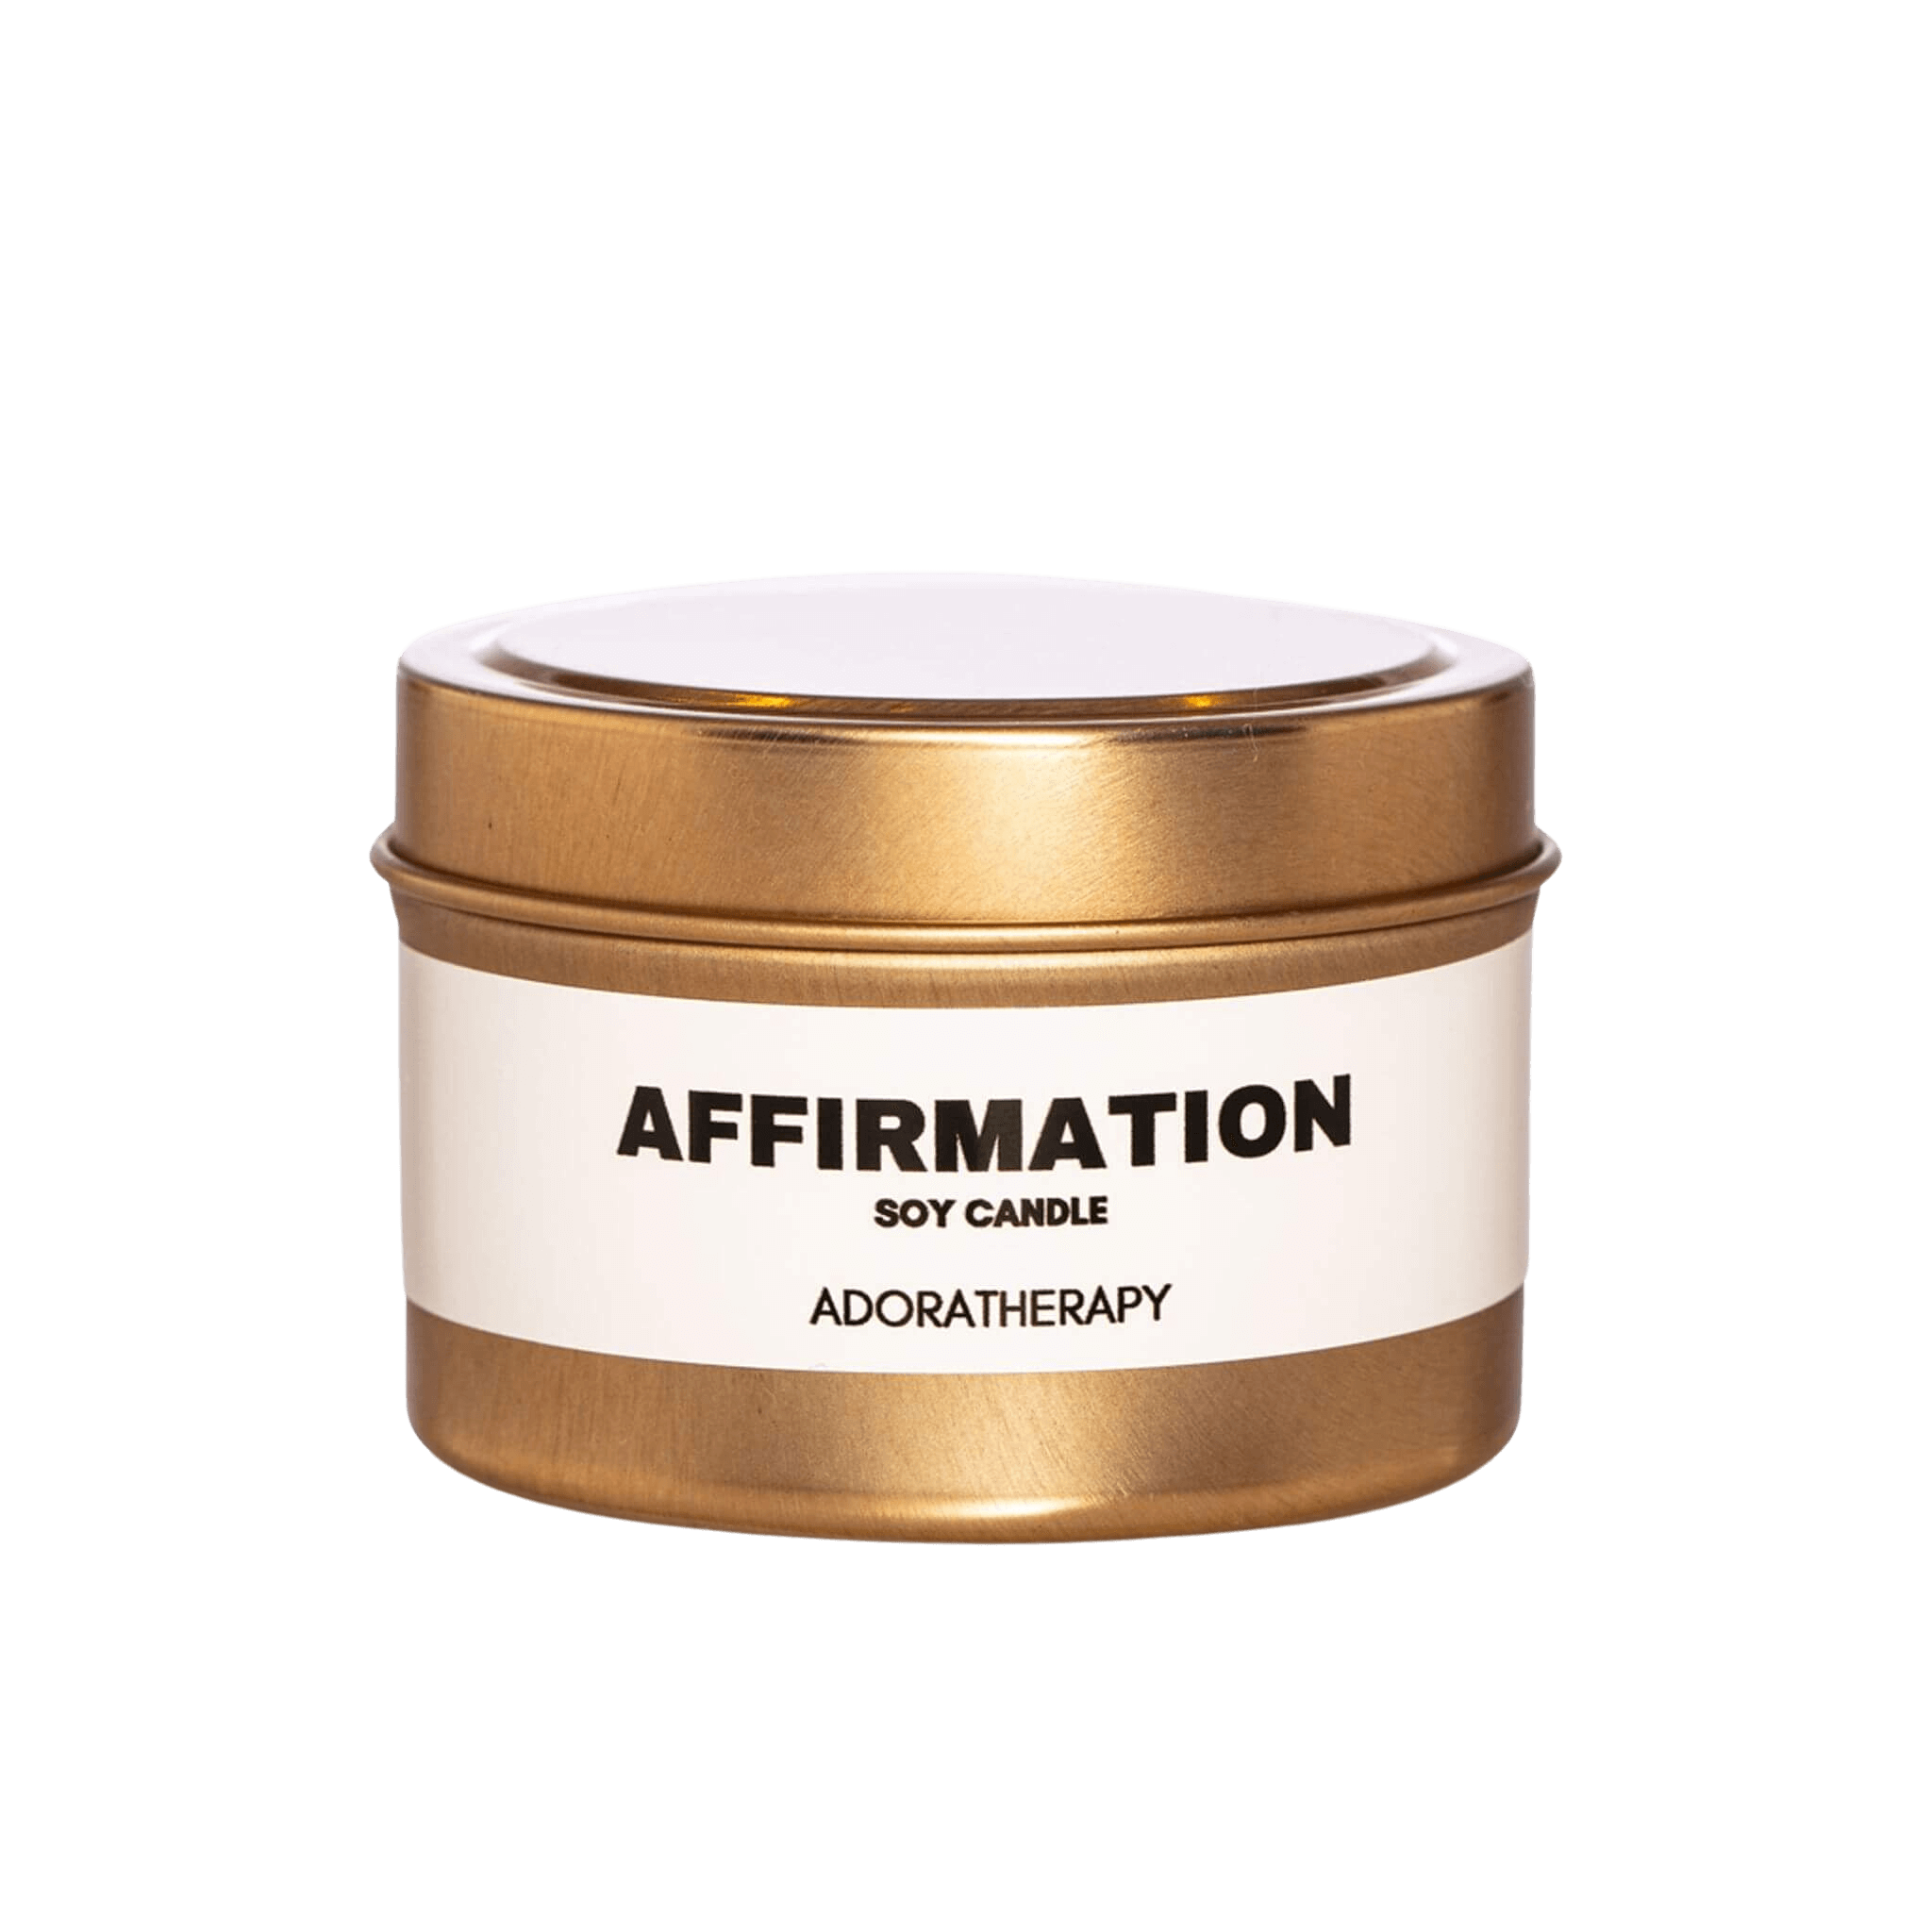 Affirmation Soy Candle